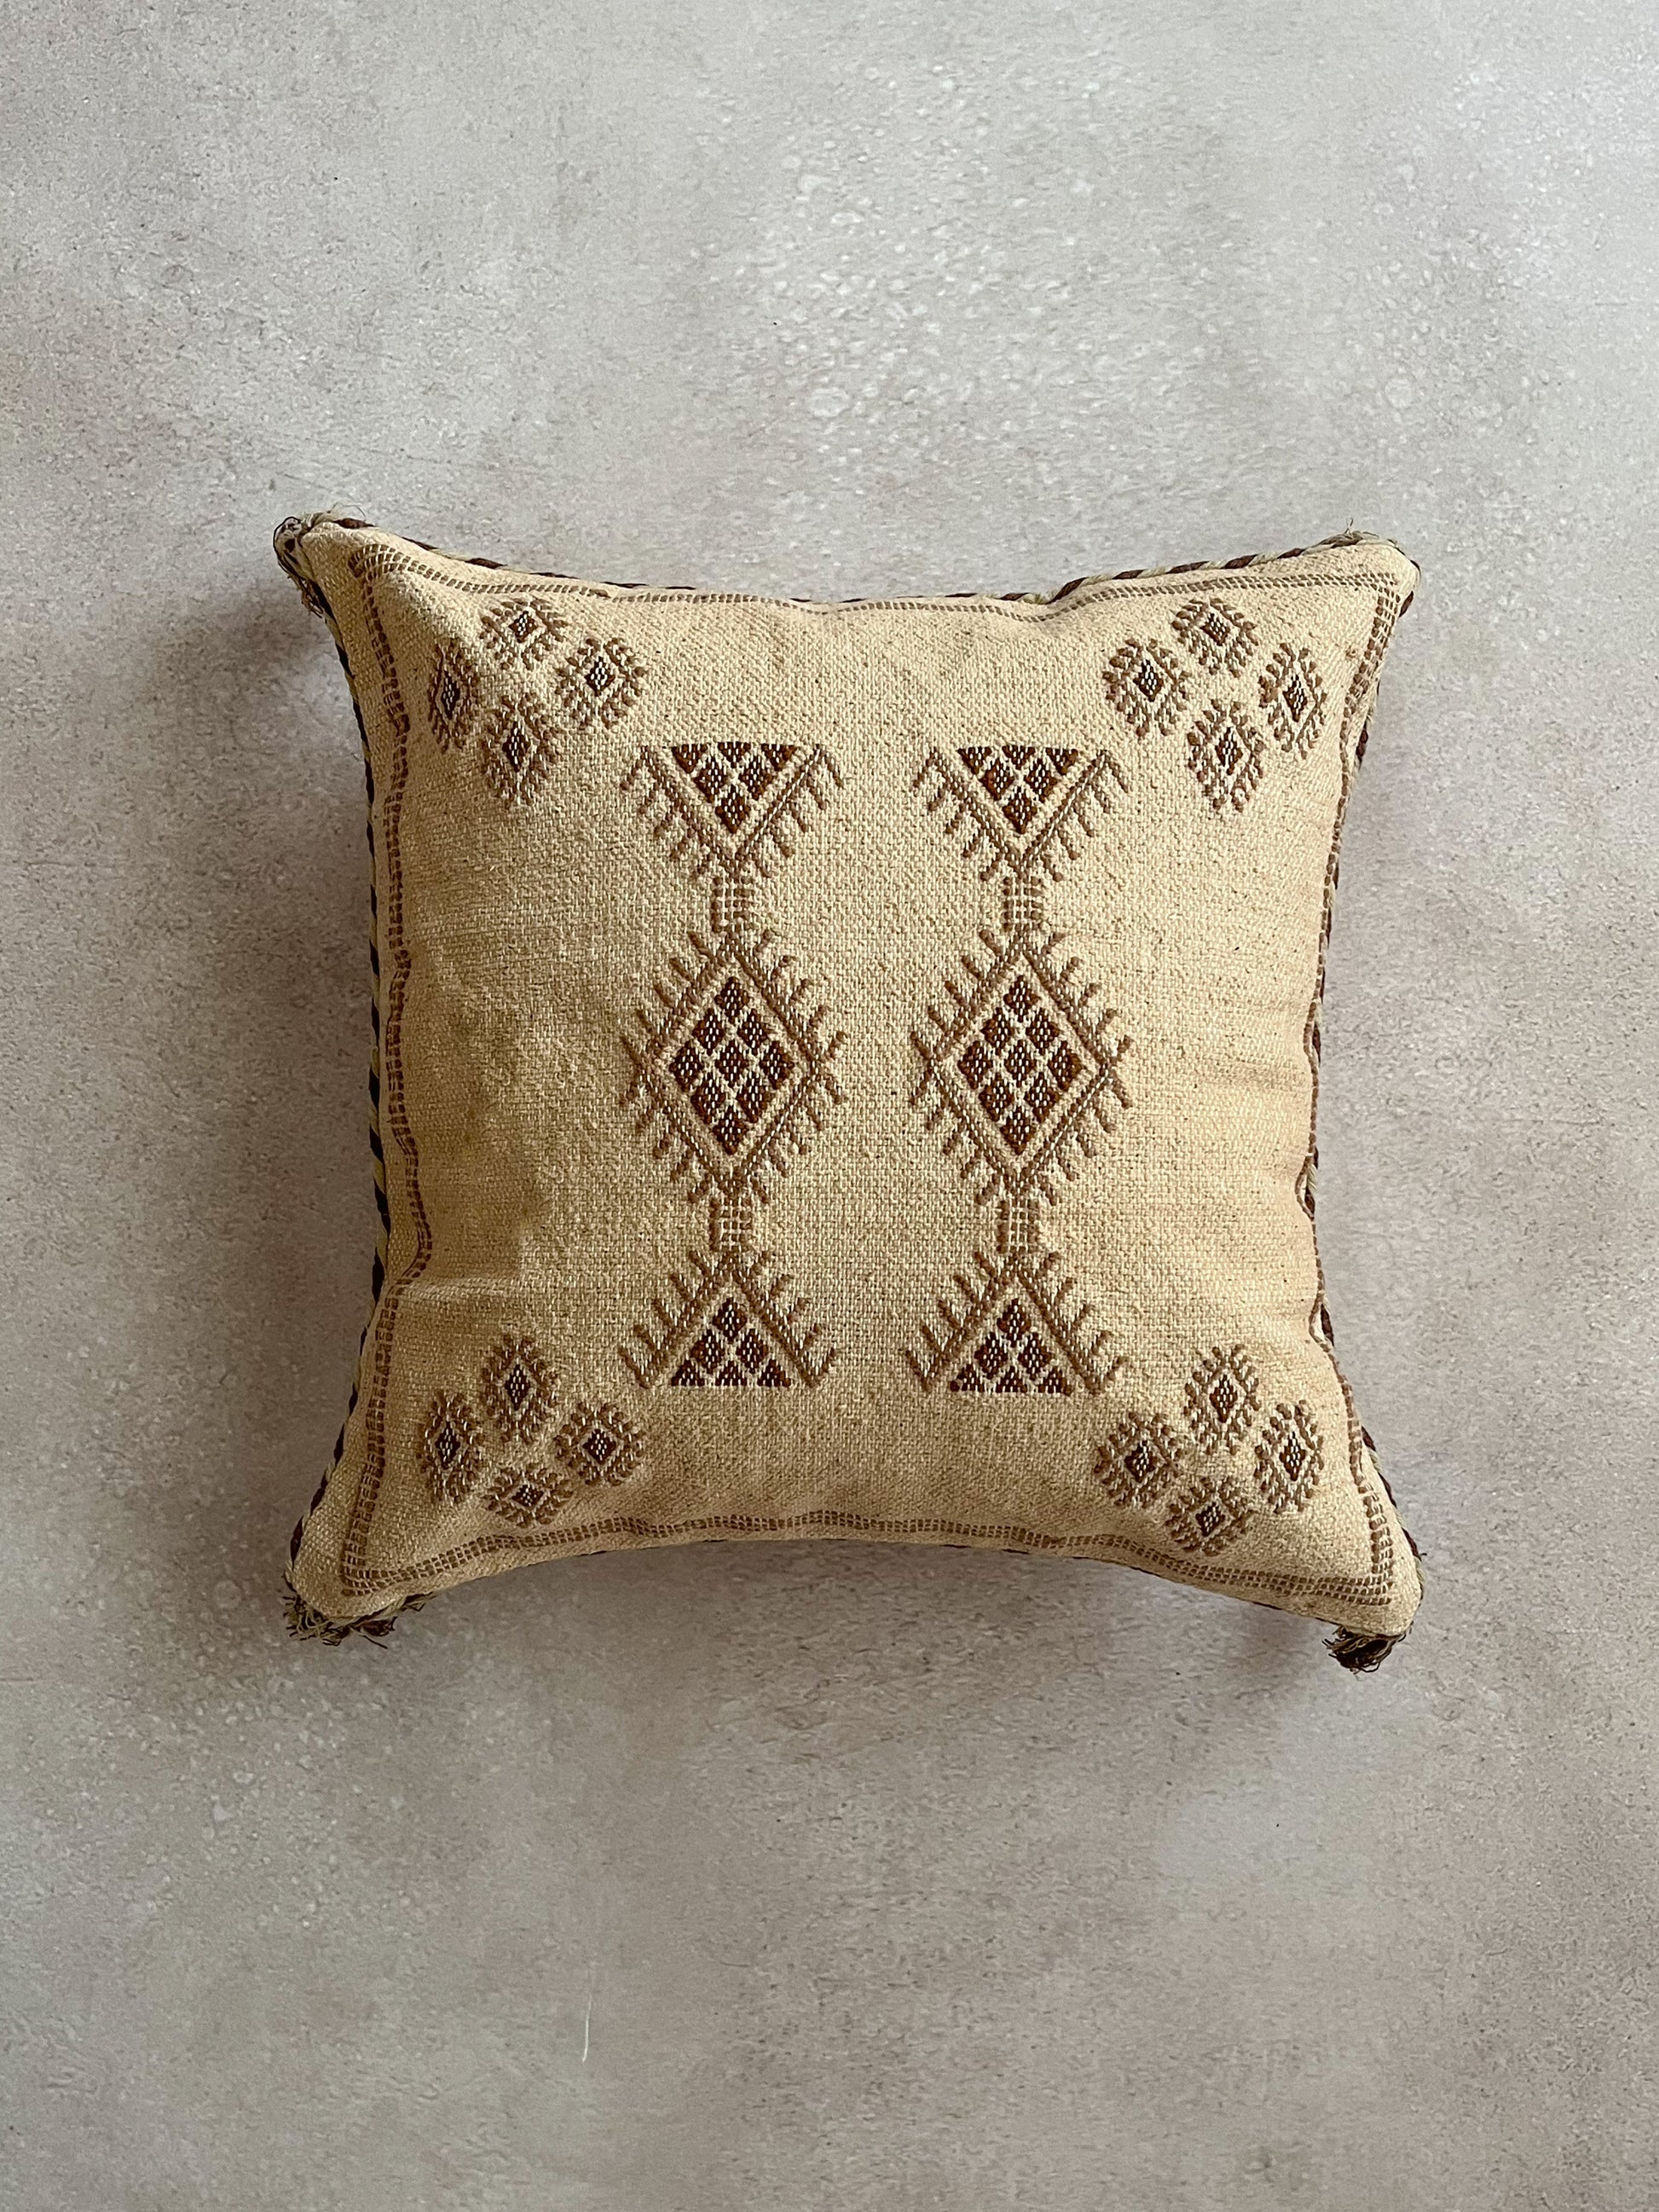 Brown colored cushion with embroidery